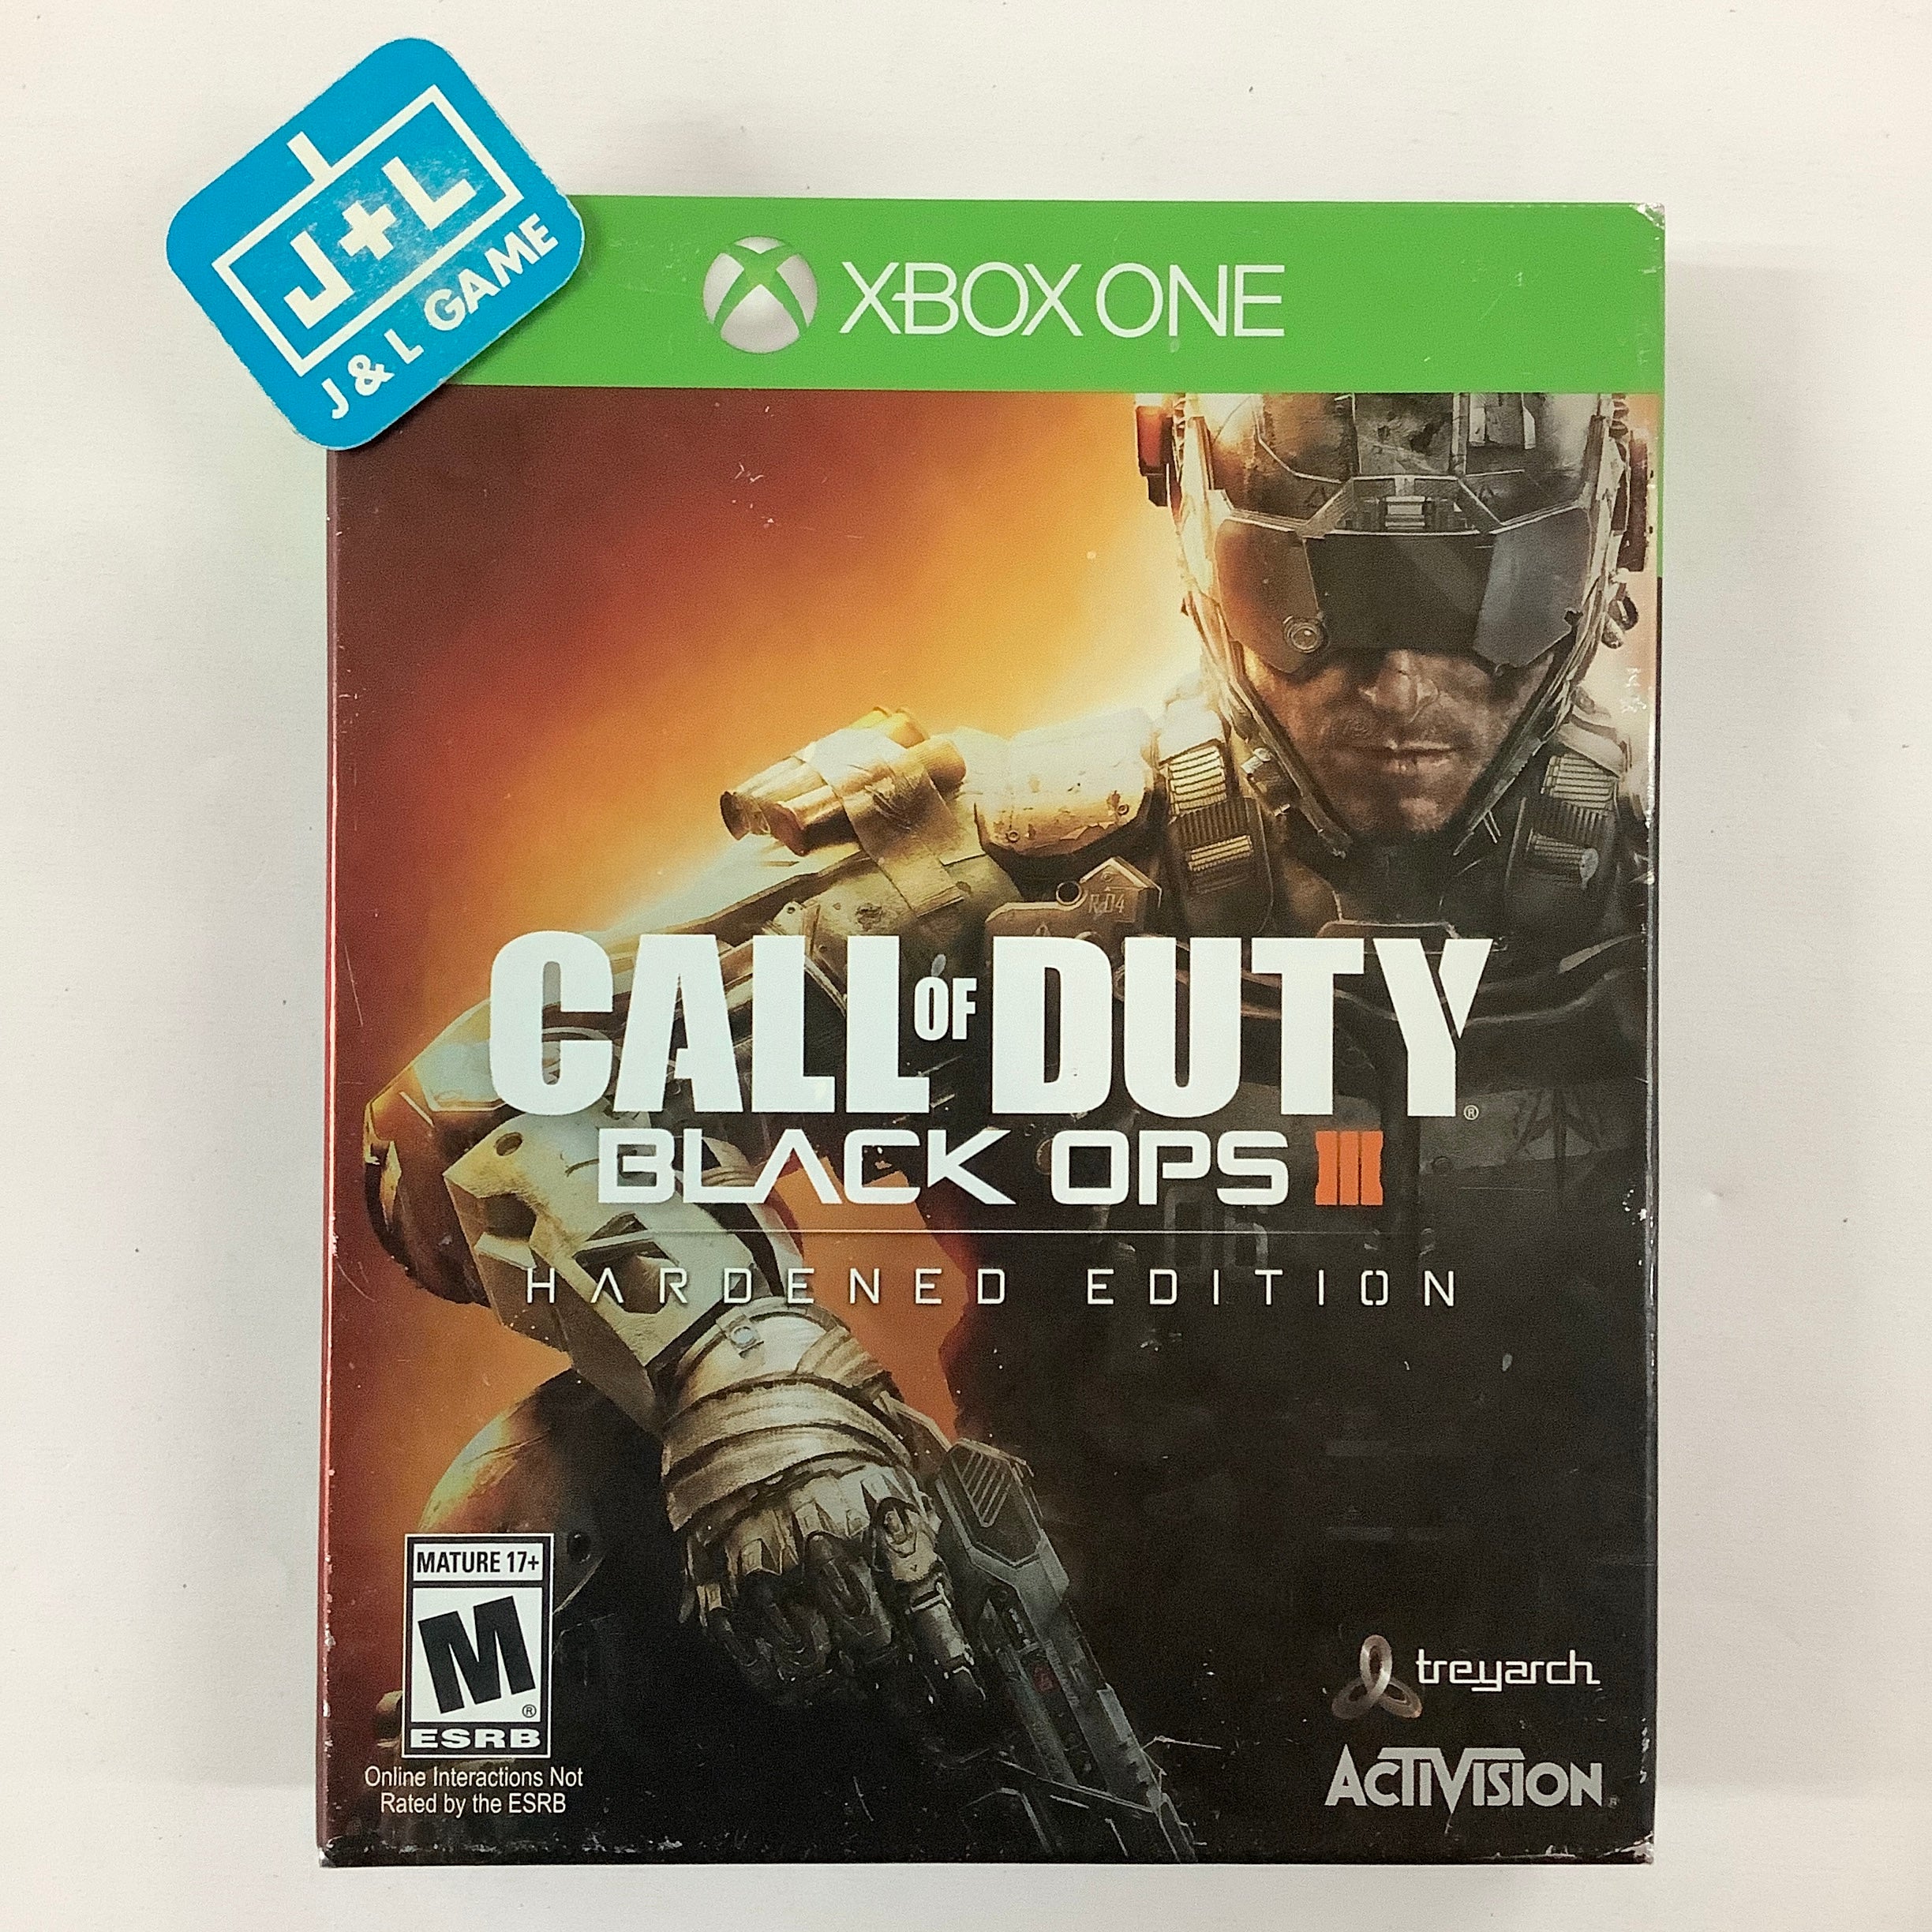 Call of Duty: Black Ops III (Hardened Edition) - (XB1) Xbox One [Pre-Owned]